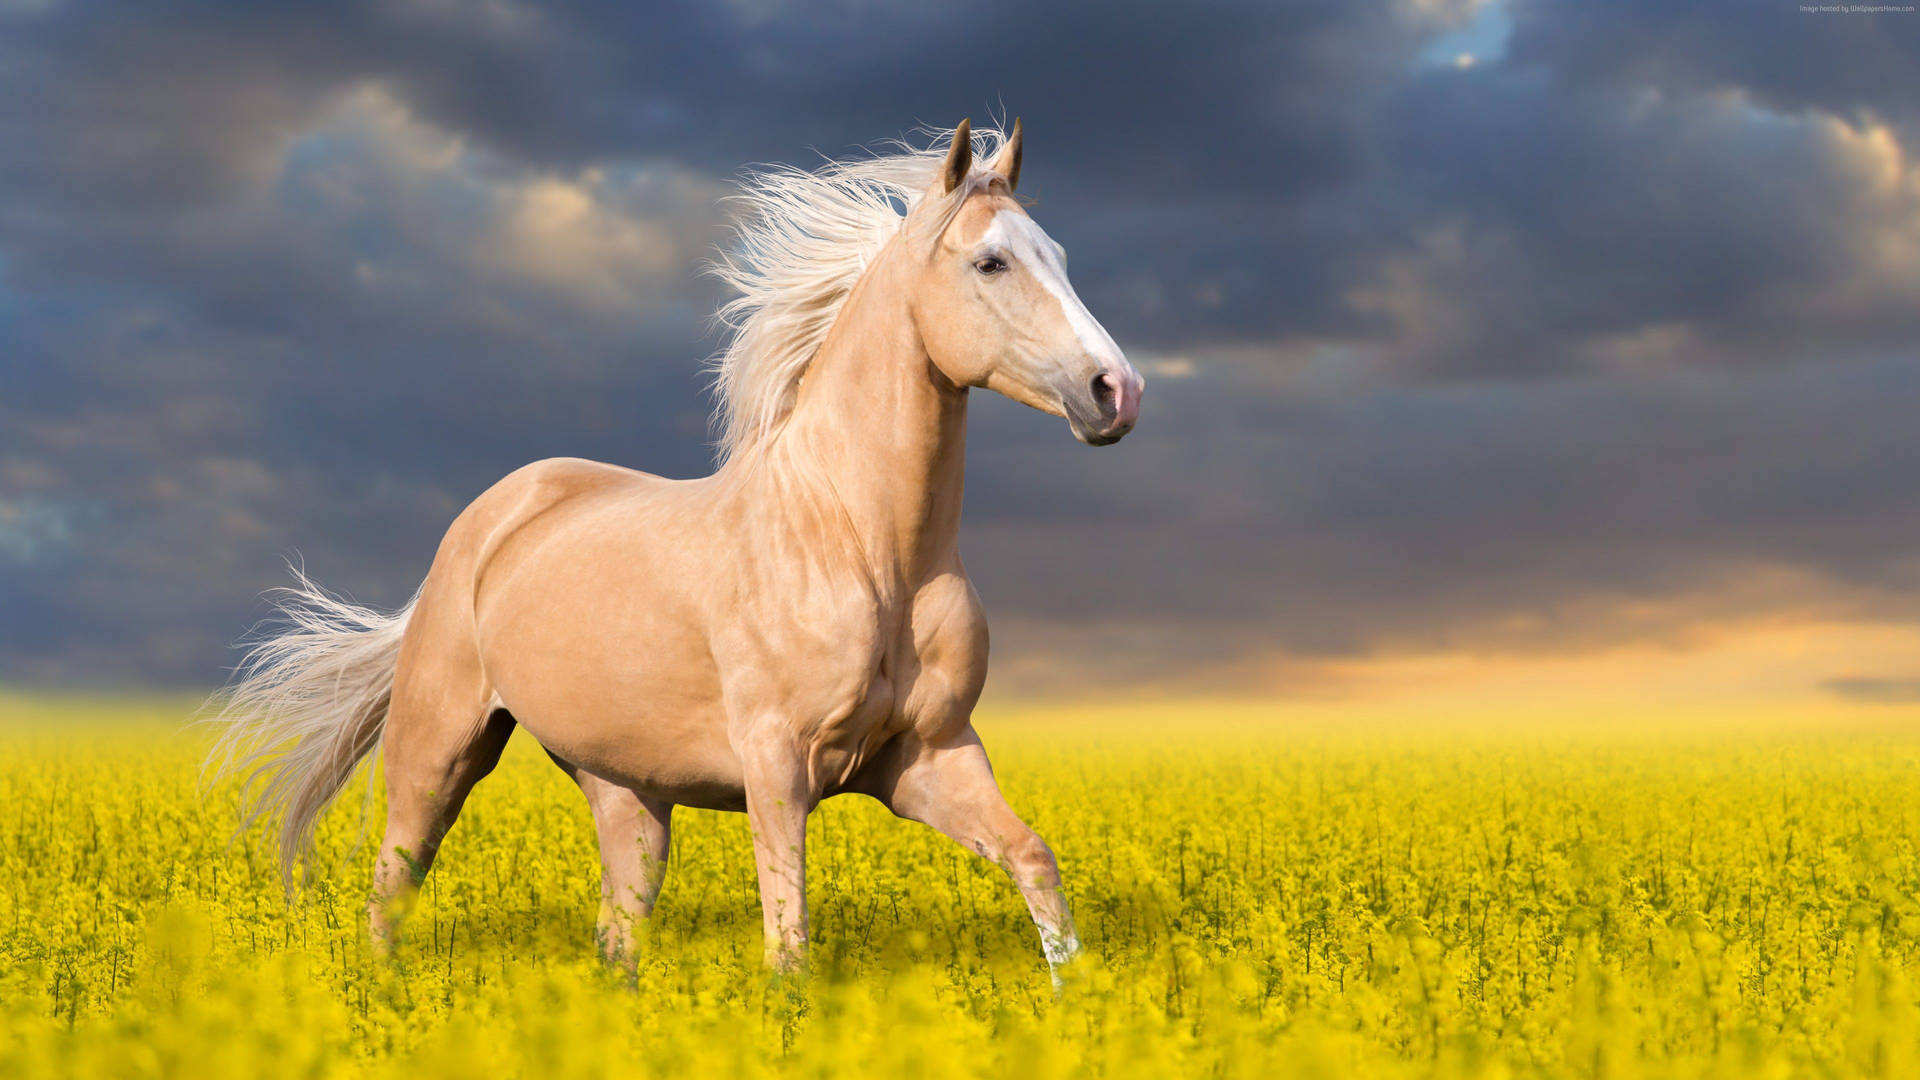 Cute Horse In The Meadow Background